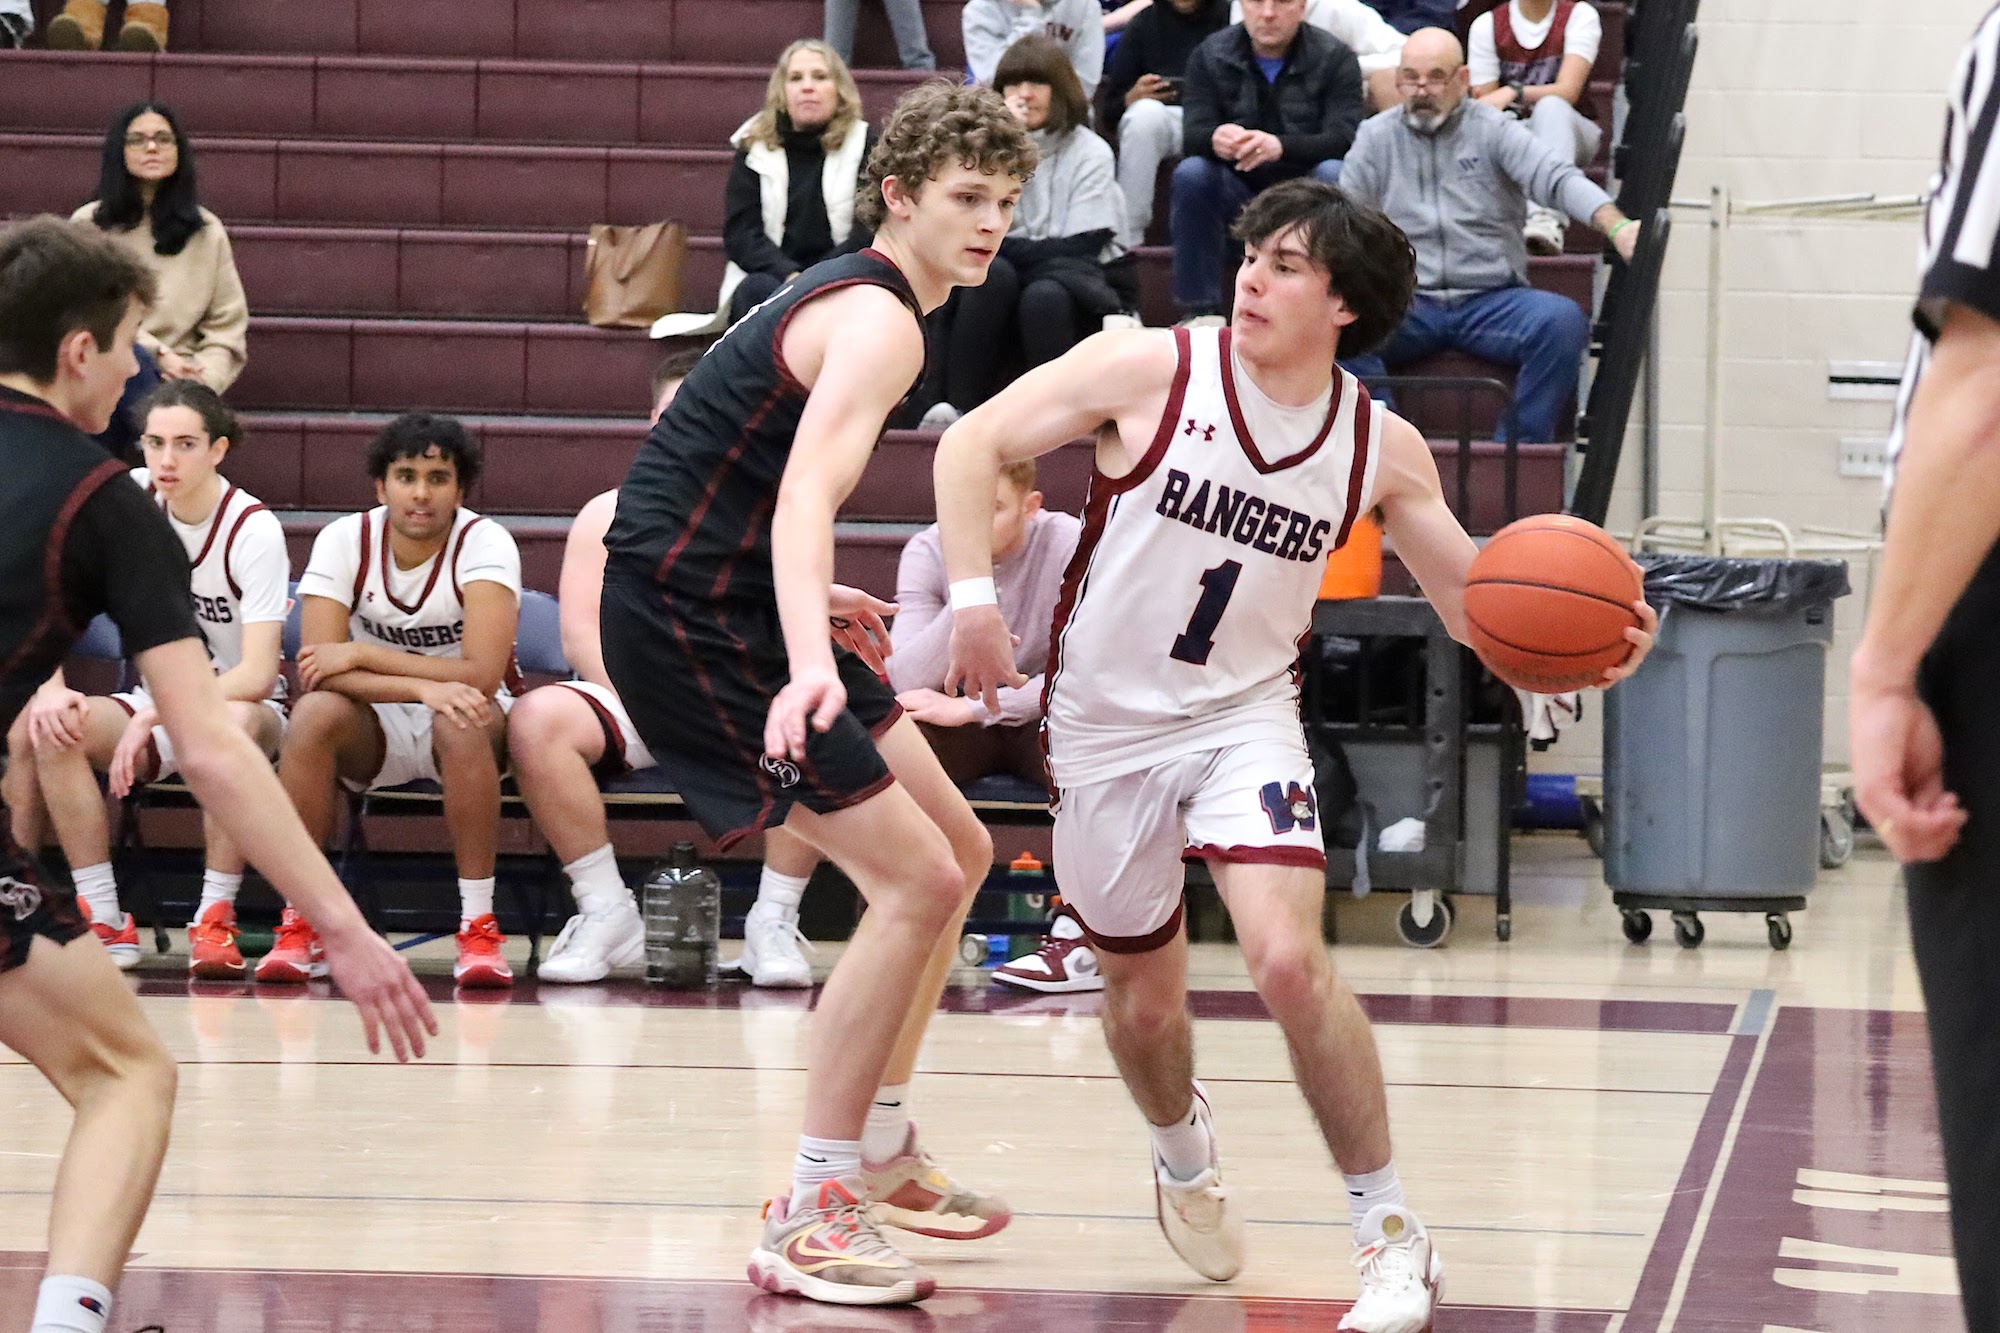 ‘We fully expected this’: Westborough basketball outmuscles G-D to qualify for state tournament